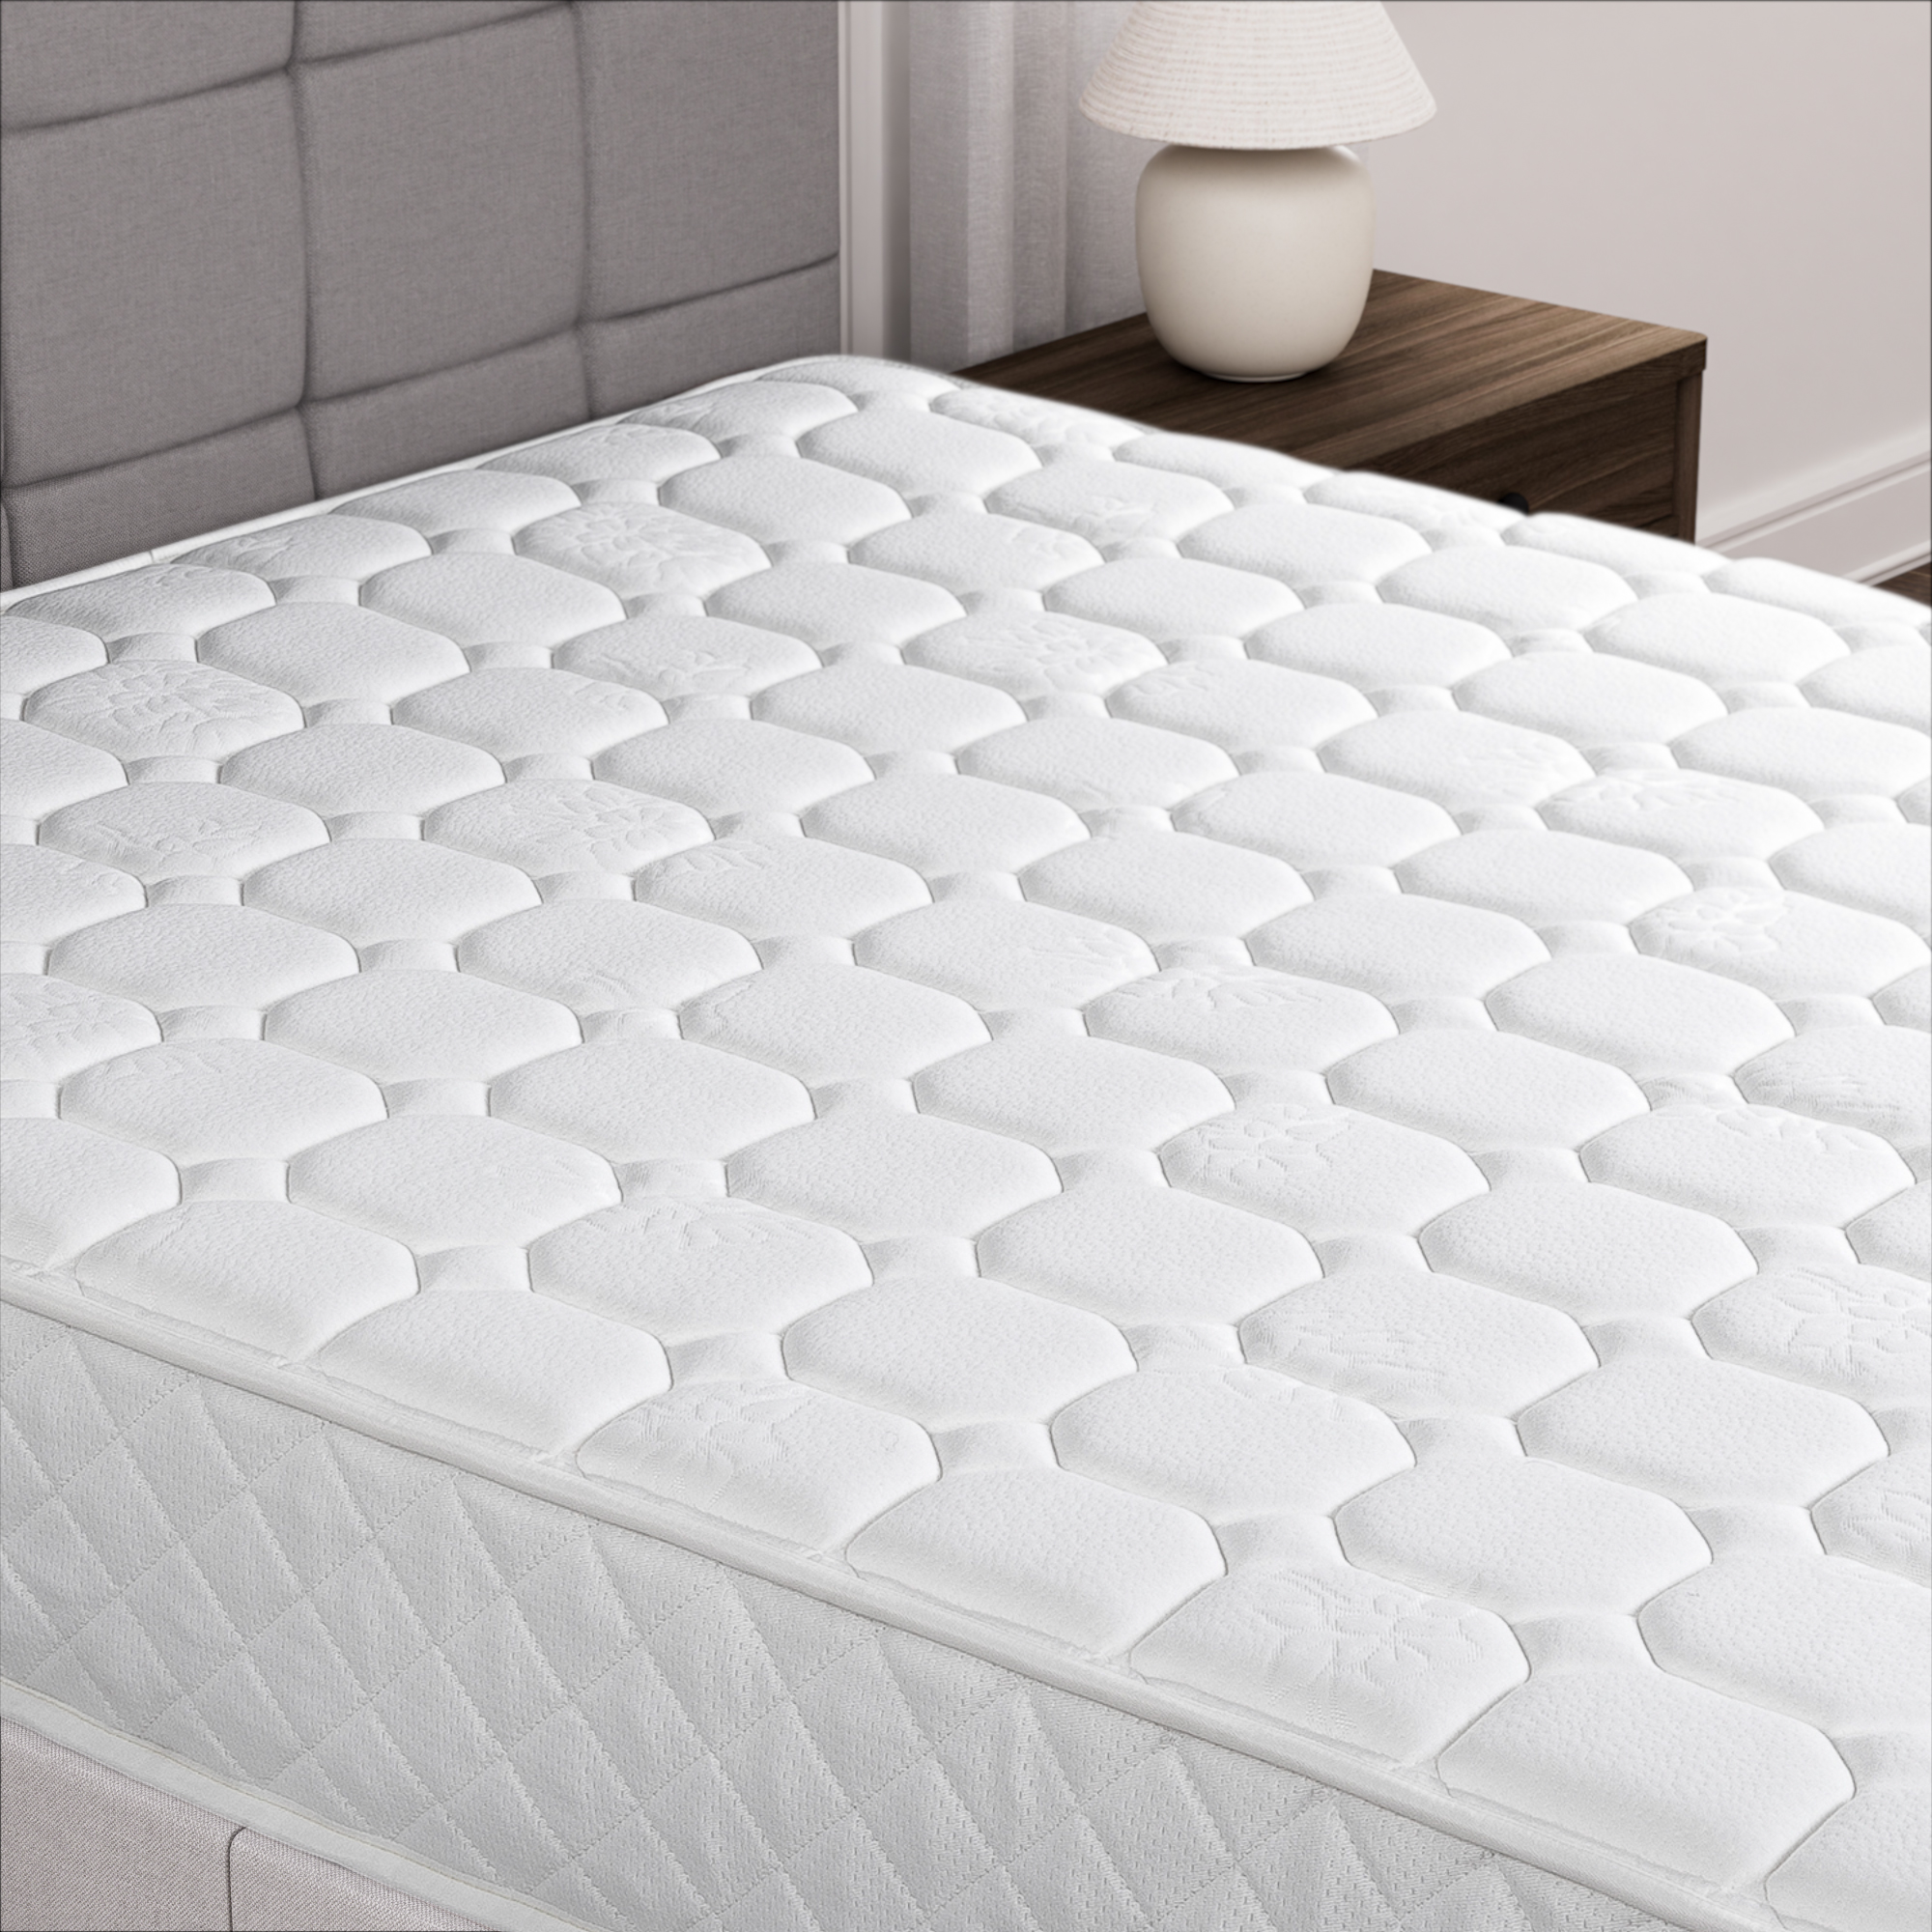 8" Quilted Hybrid of Comfort Foam and Pocket Spring Mattress, Twin - image 3 of 5